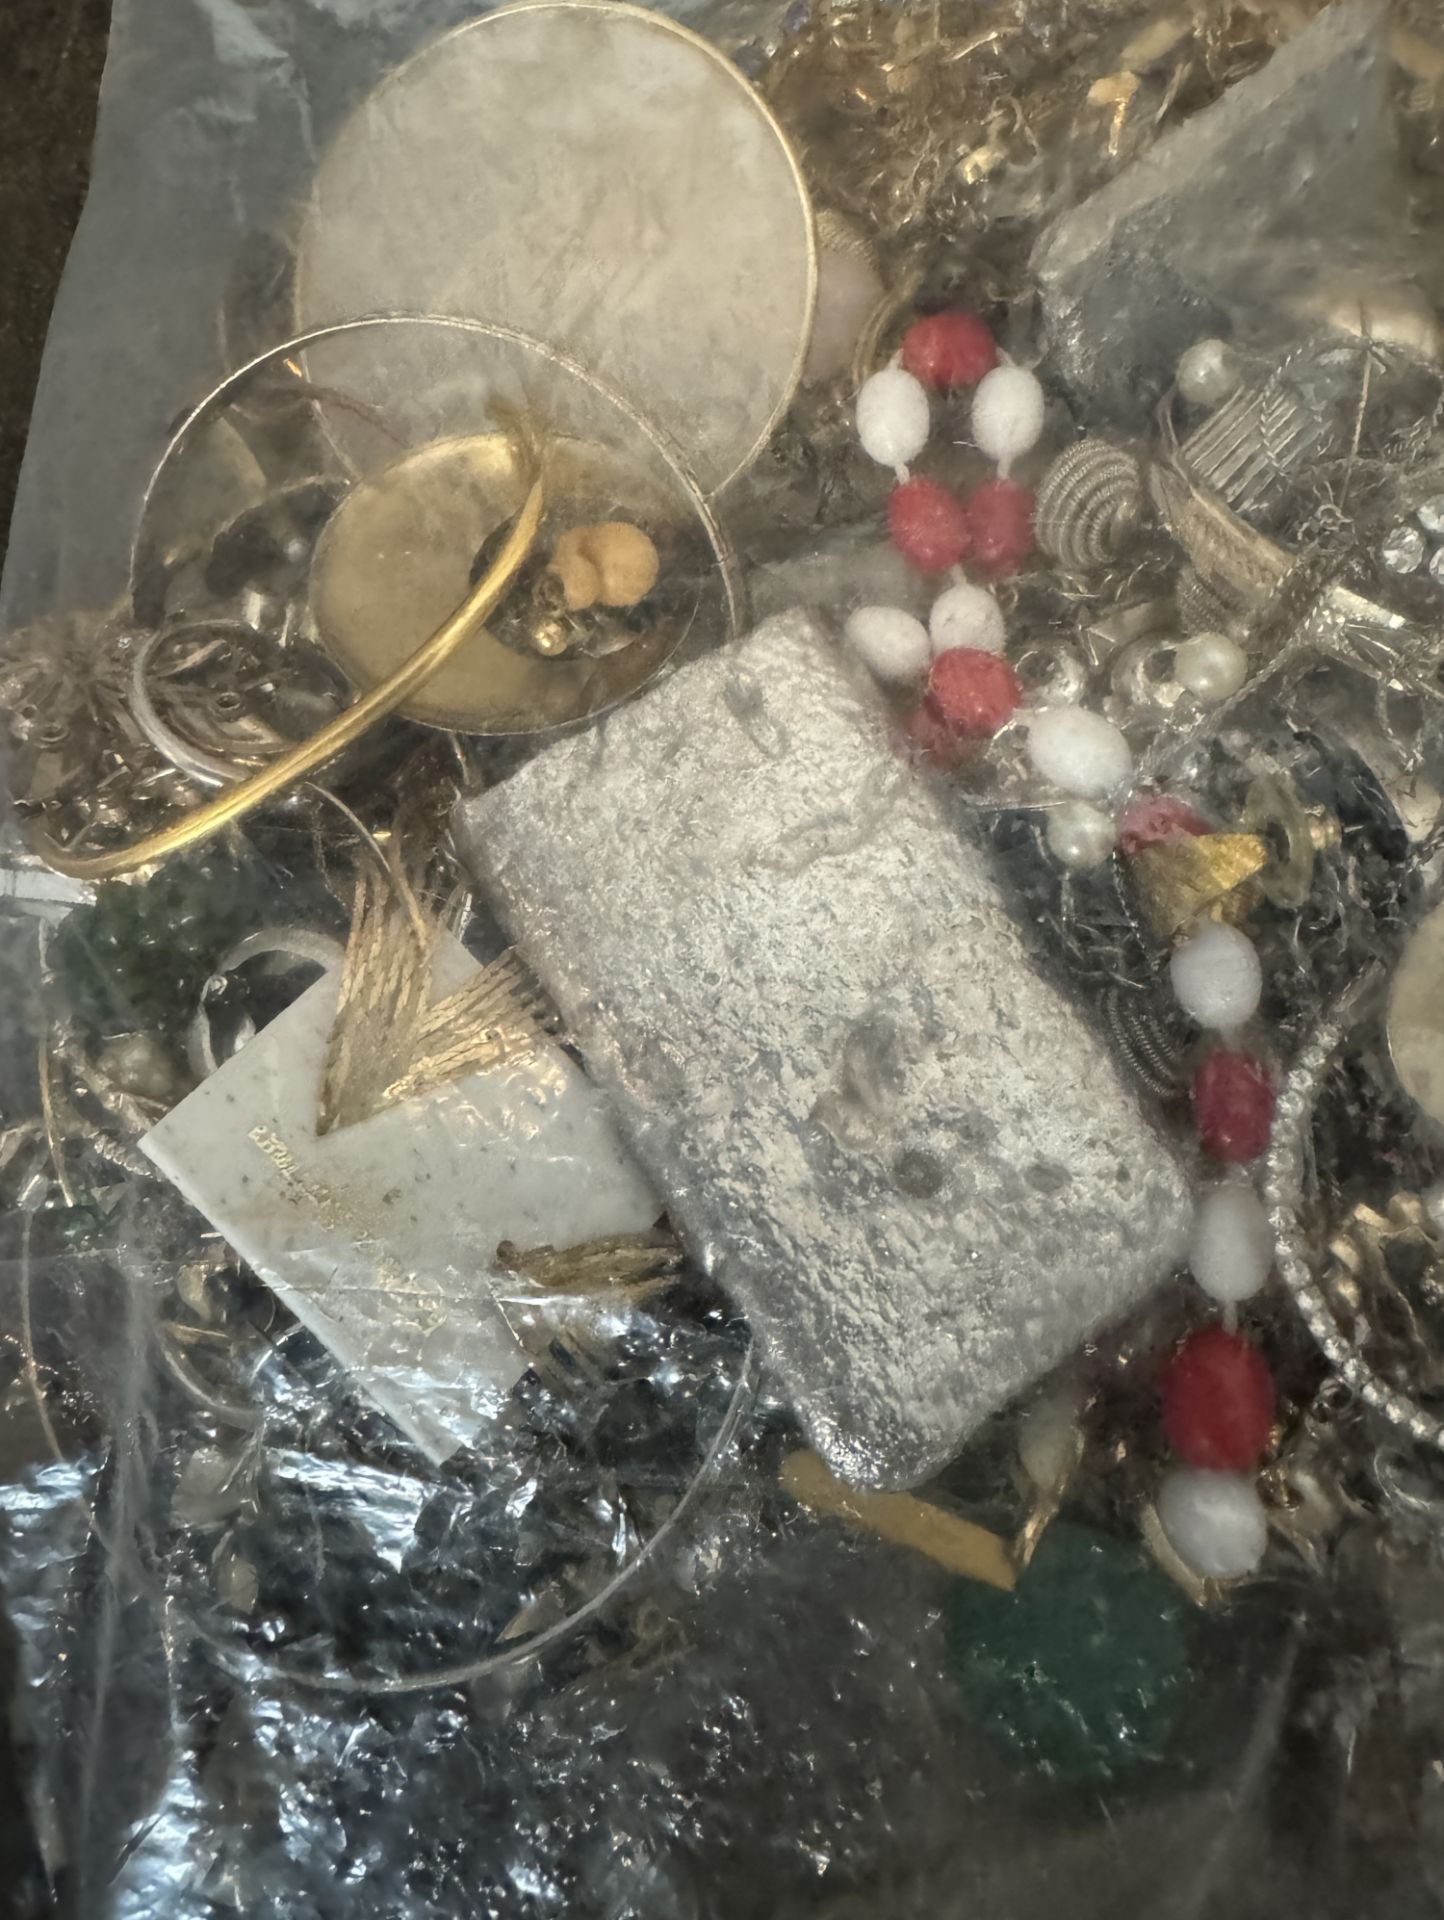 BAG OF MIXED UNSORTED JEWELRY / SOME SORT OF SILER BRICK INSIDE IT - Image 3 of 4